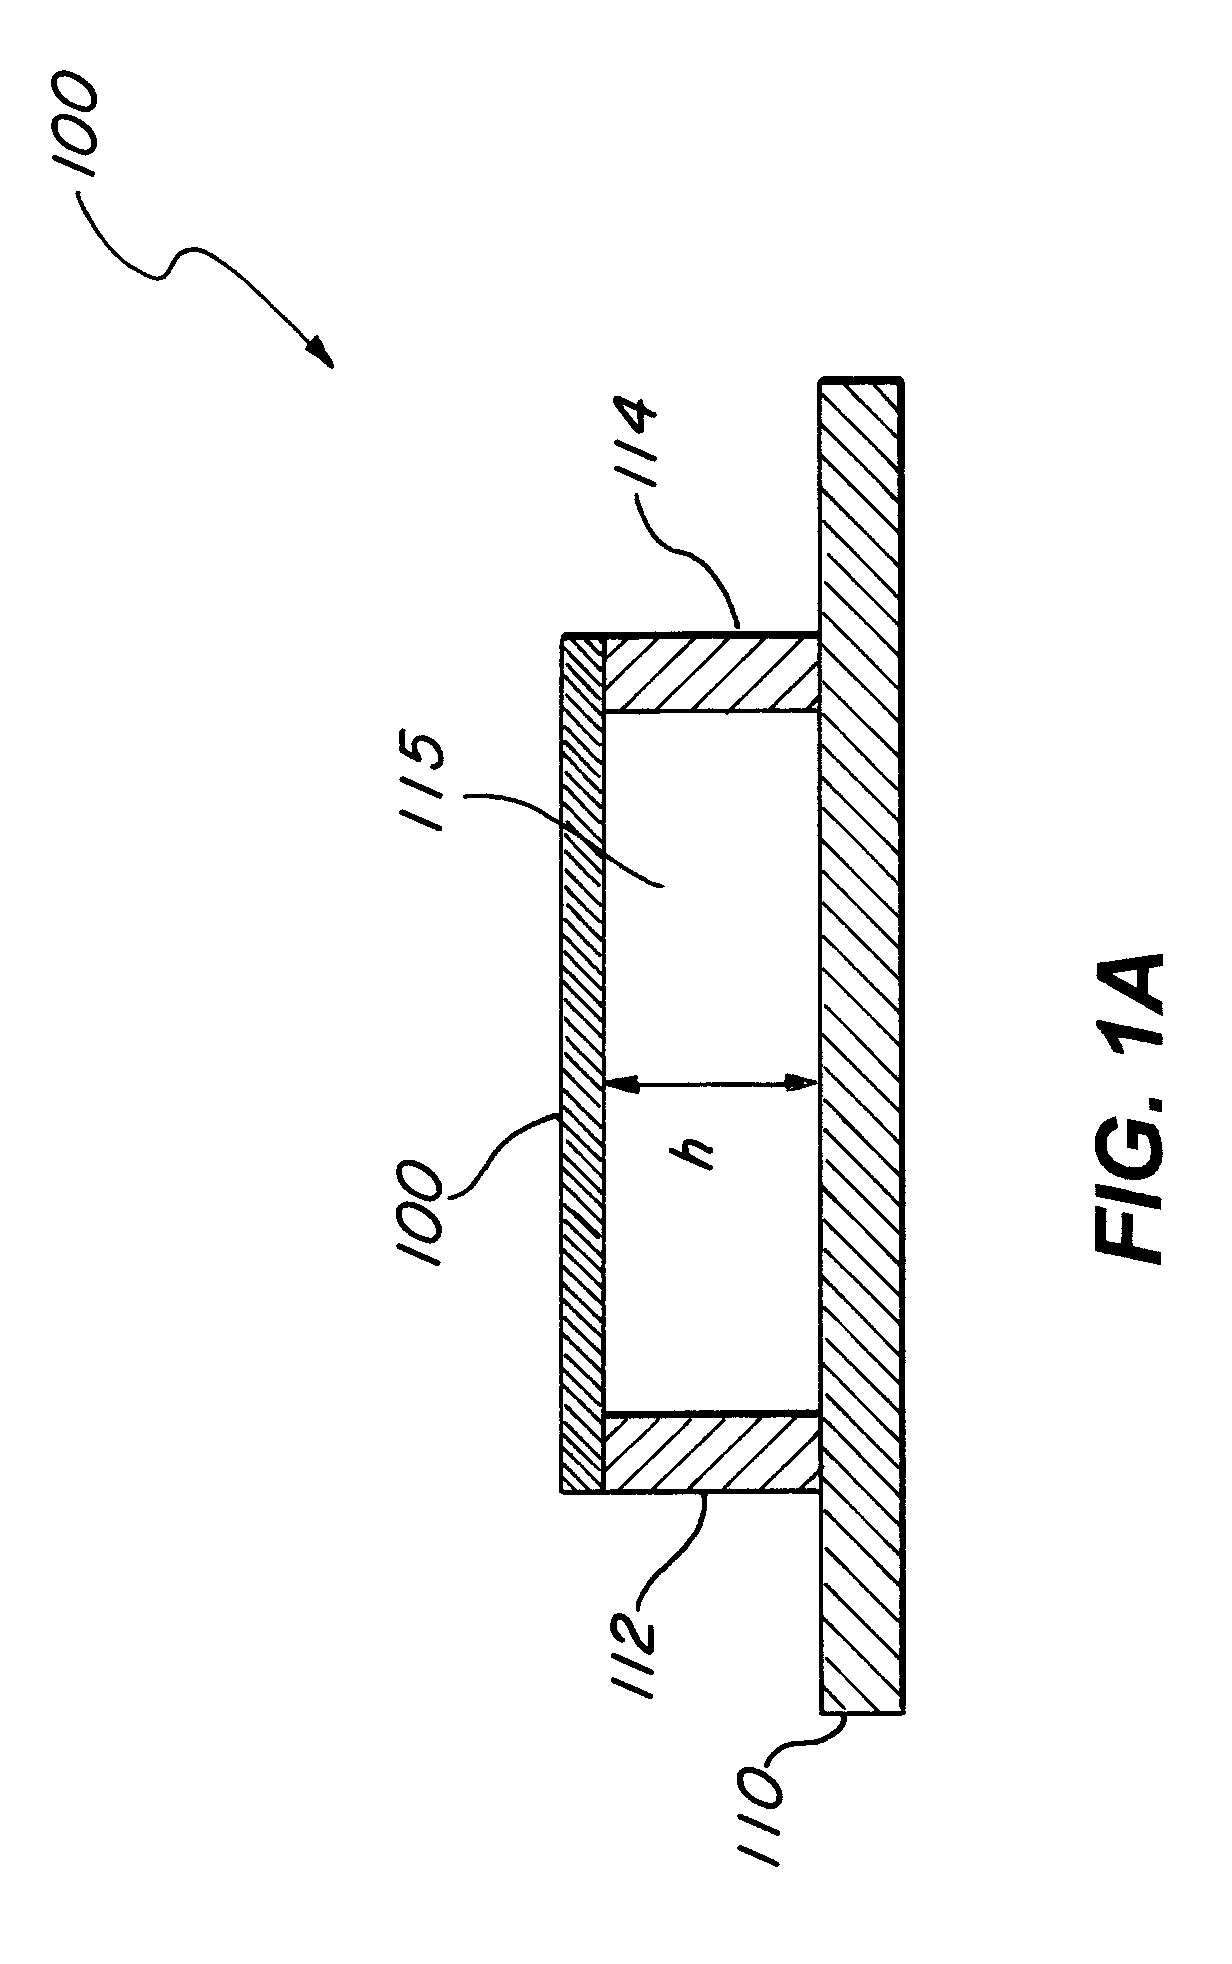 Method And Apparatus for Microcontact Printing of MEMS